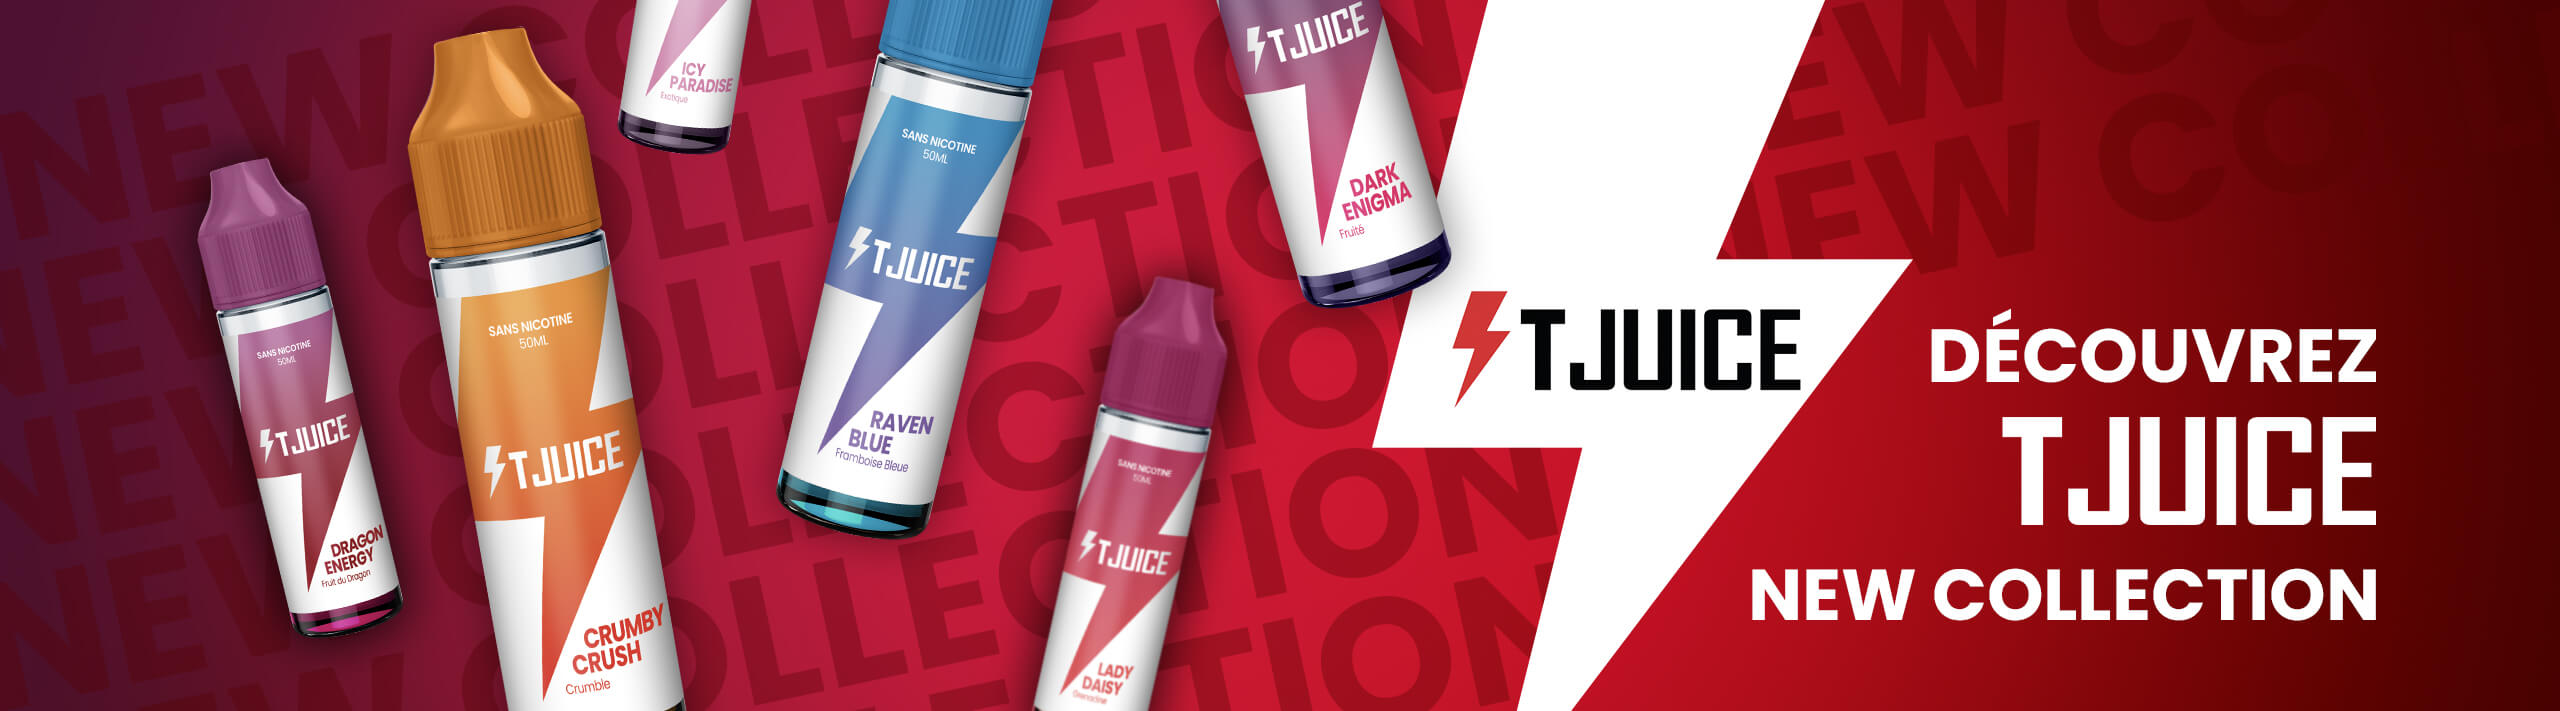 TJuice new collection